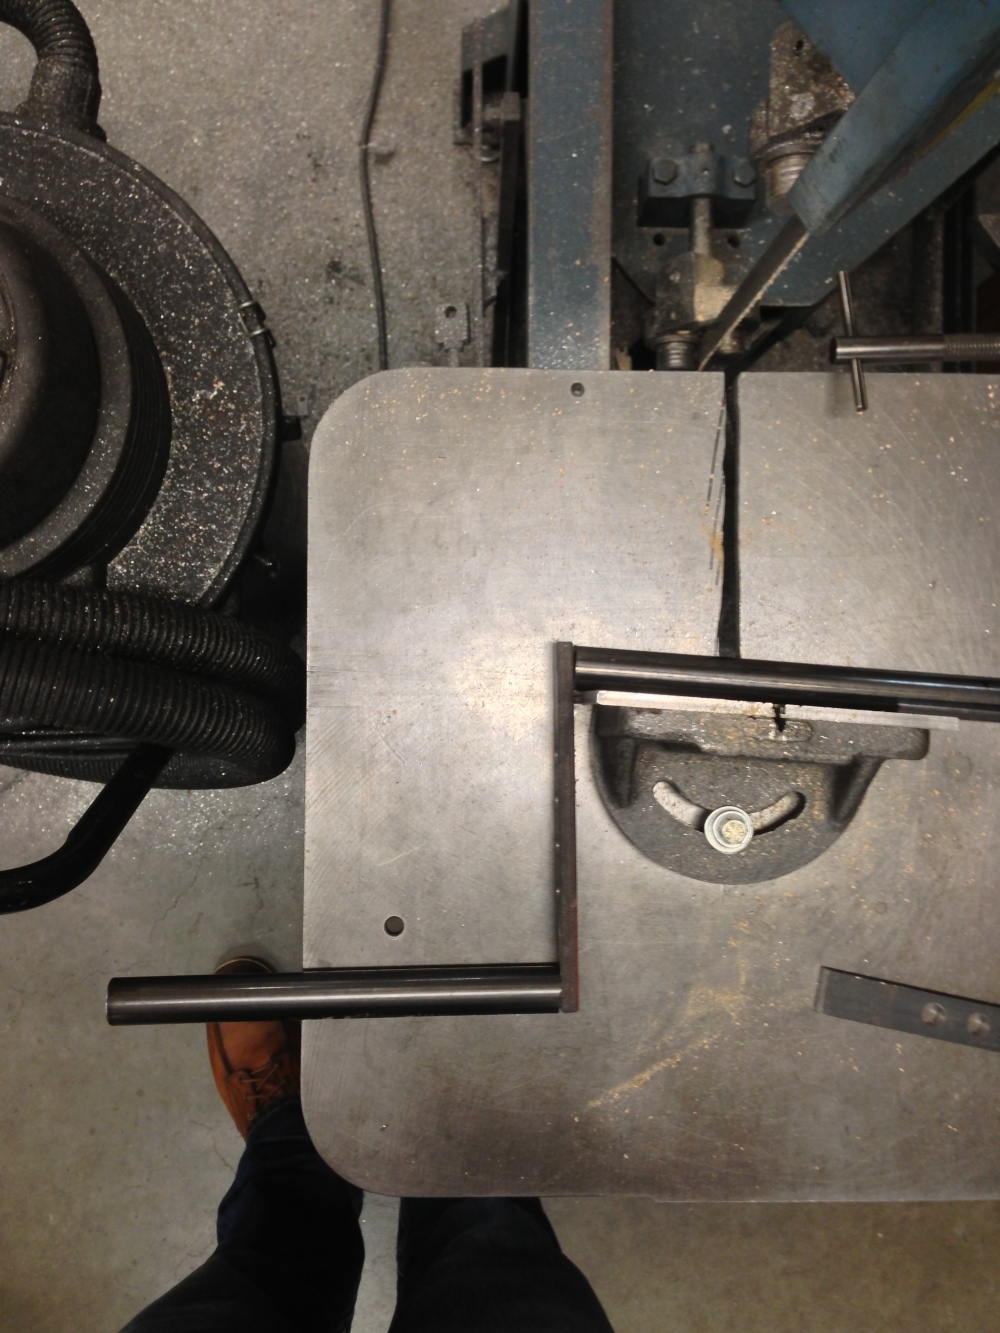 This band saw is a charm for cutting angles - you're looking at 5 degrees.